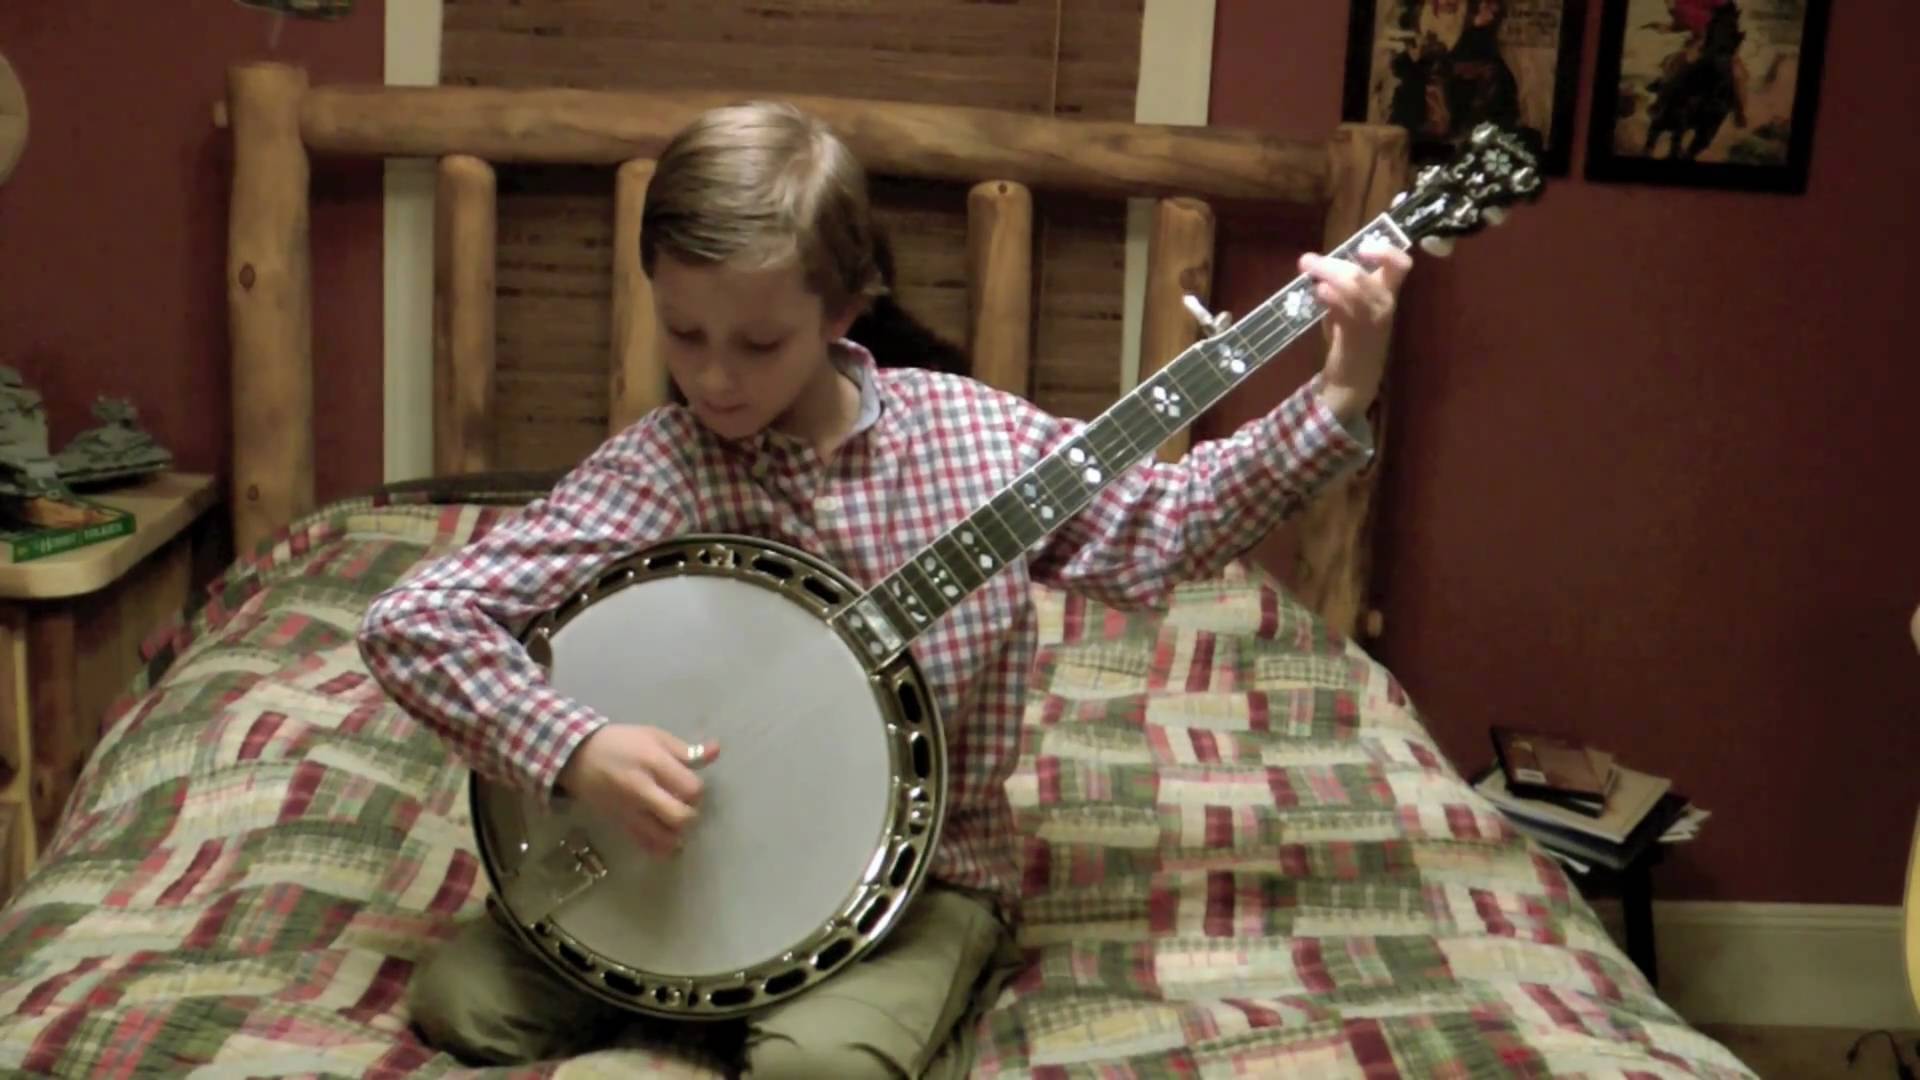 Watch: 3 Brothers From New Jersey Are Taking The Bluegrass World By Storm